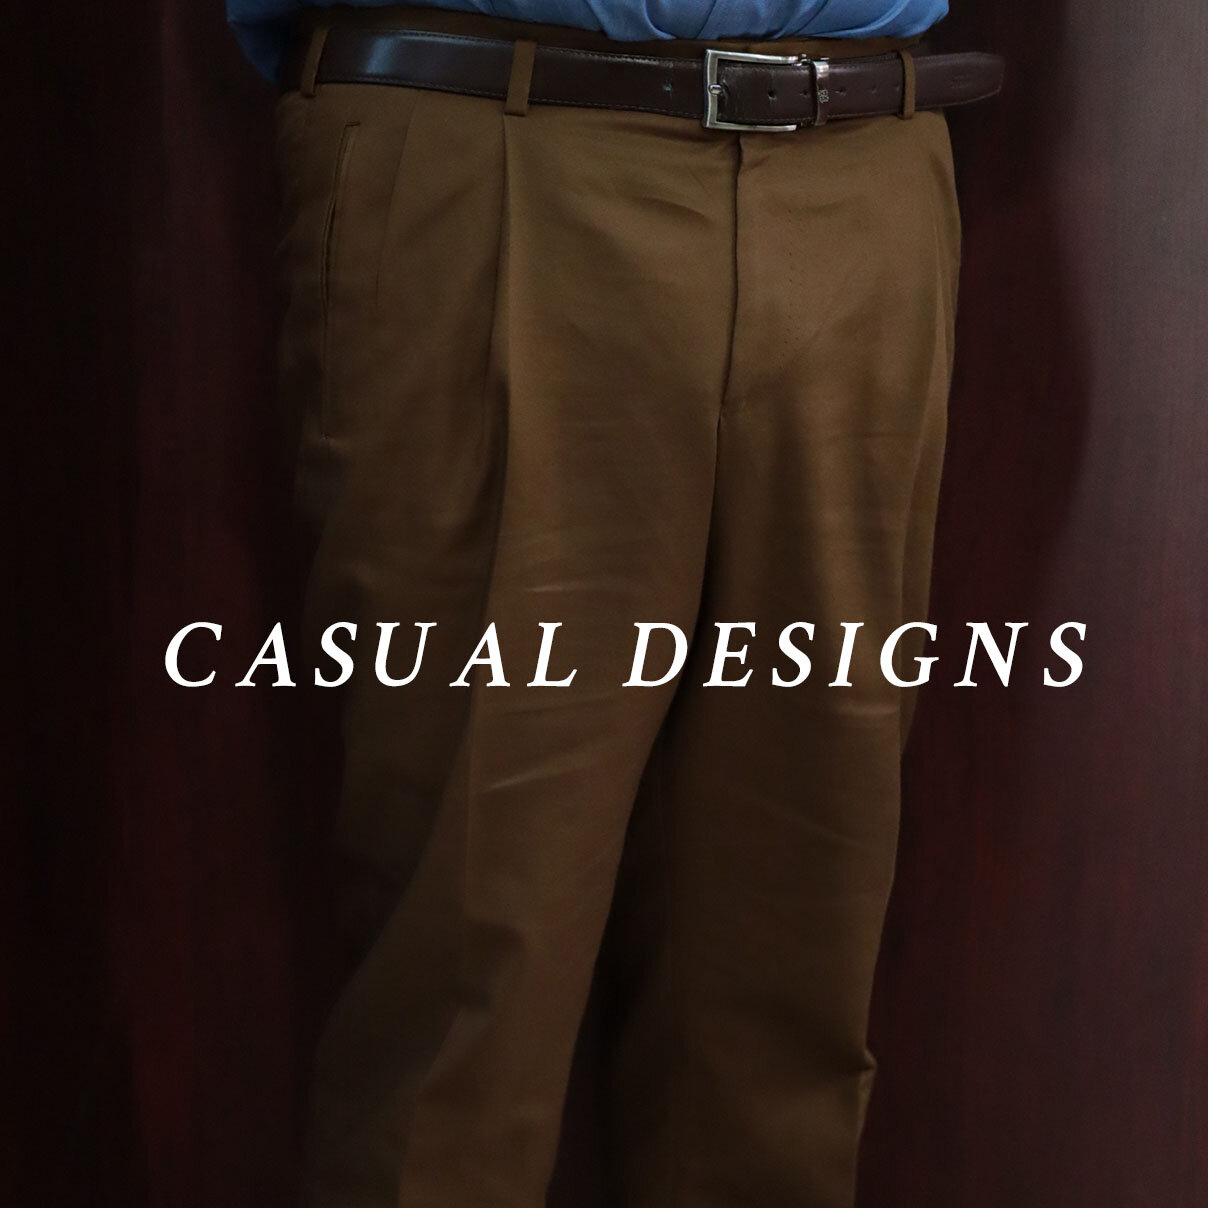 Made Suits® Singapore Tailor — Sartorial Design Trousers